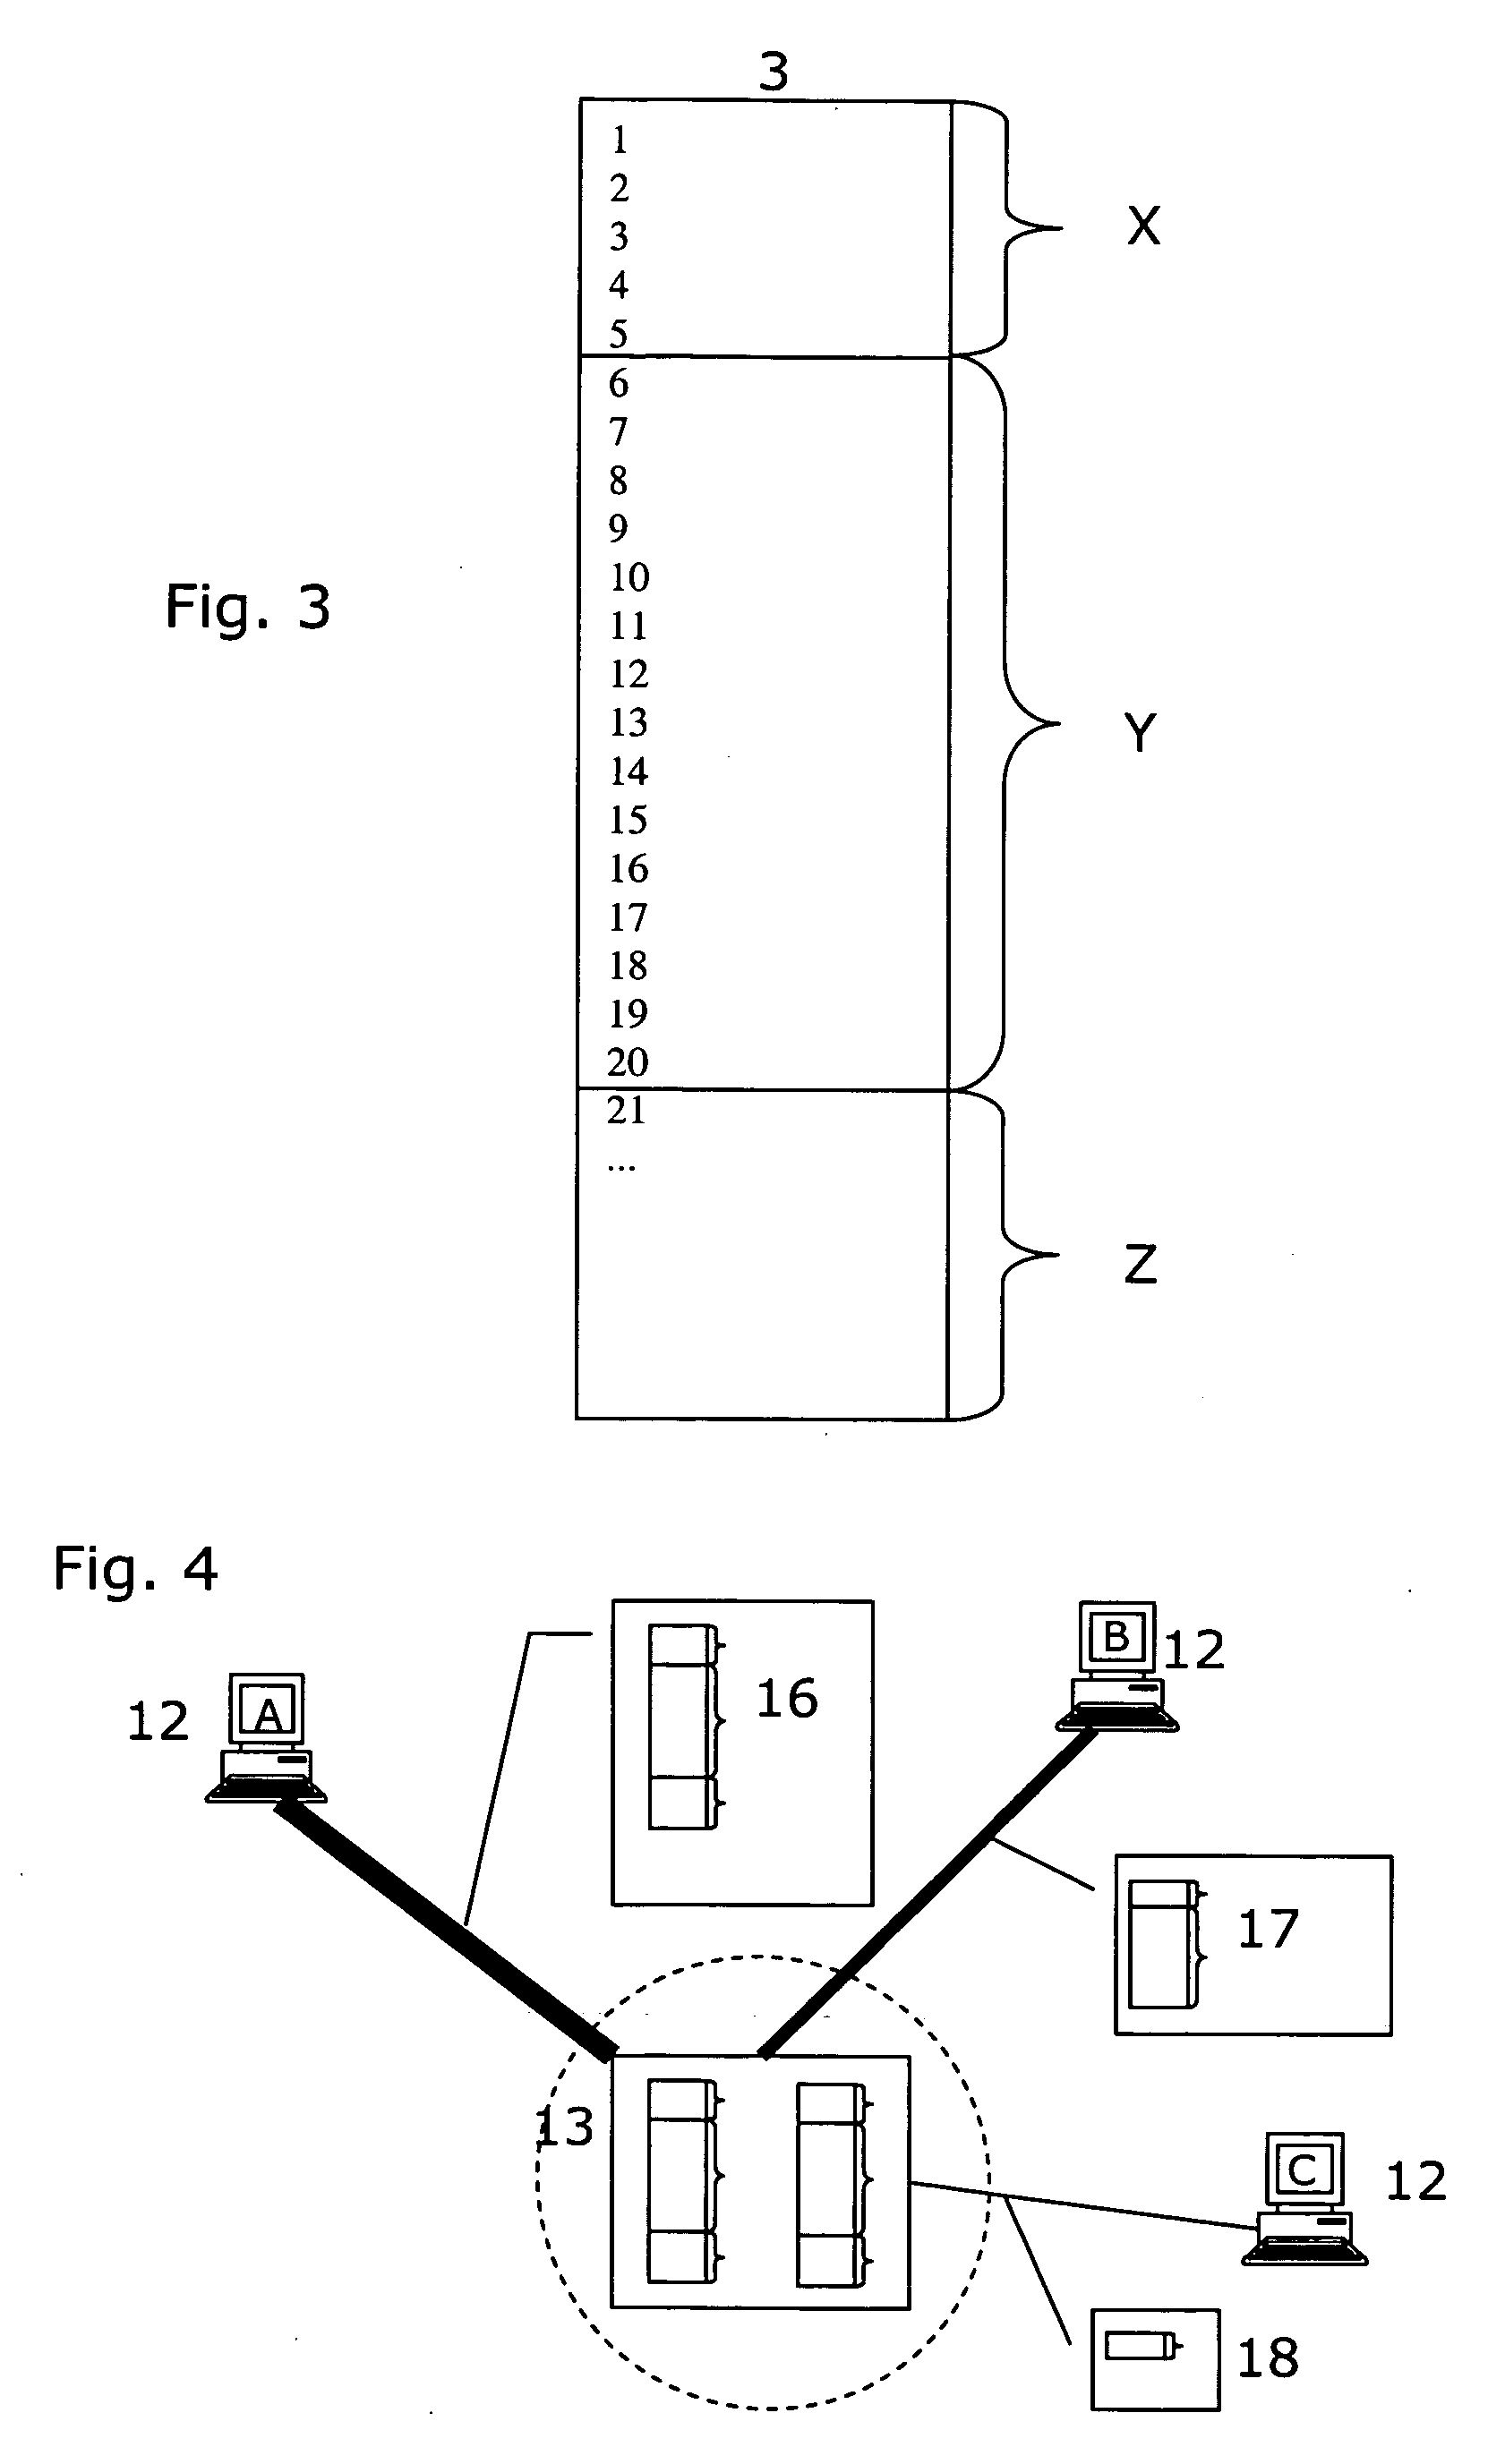 System and method for adaptive information dissemination